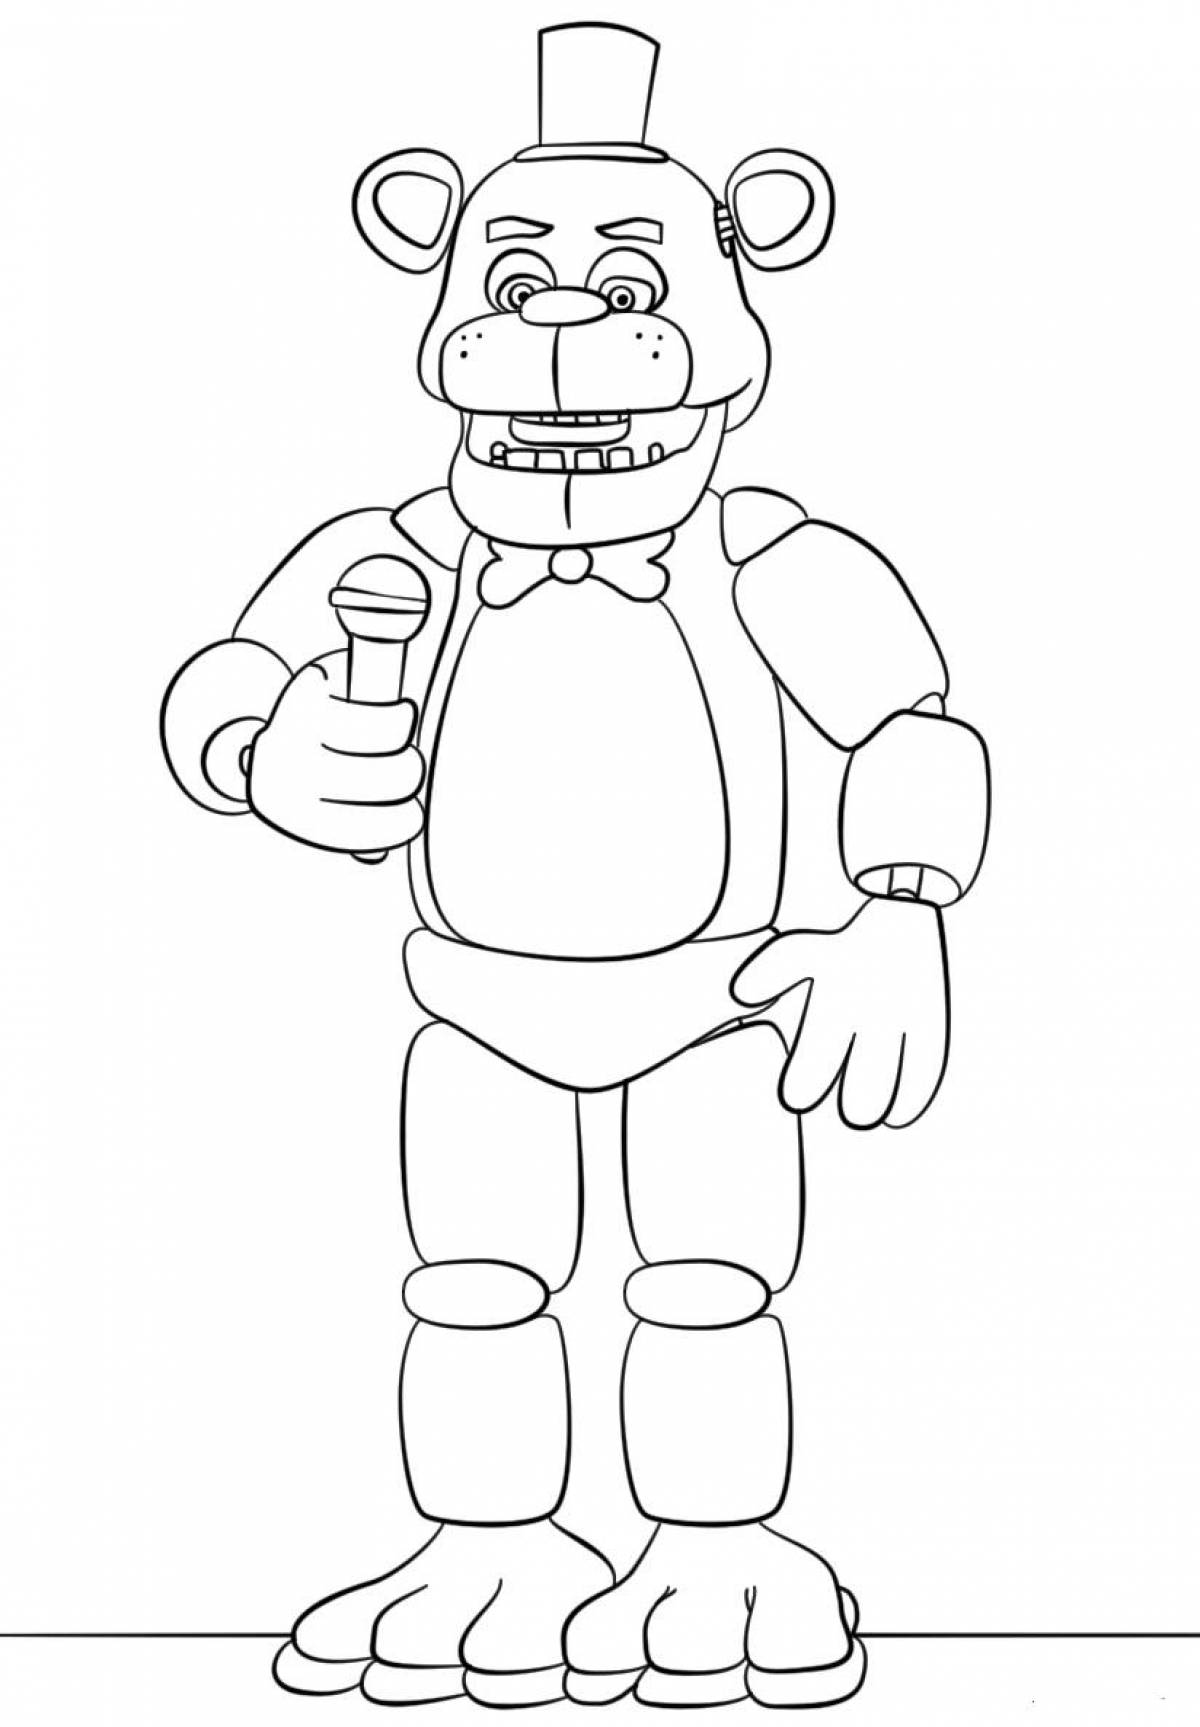 Colorful adult animatronics coloring page